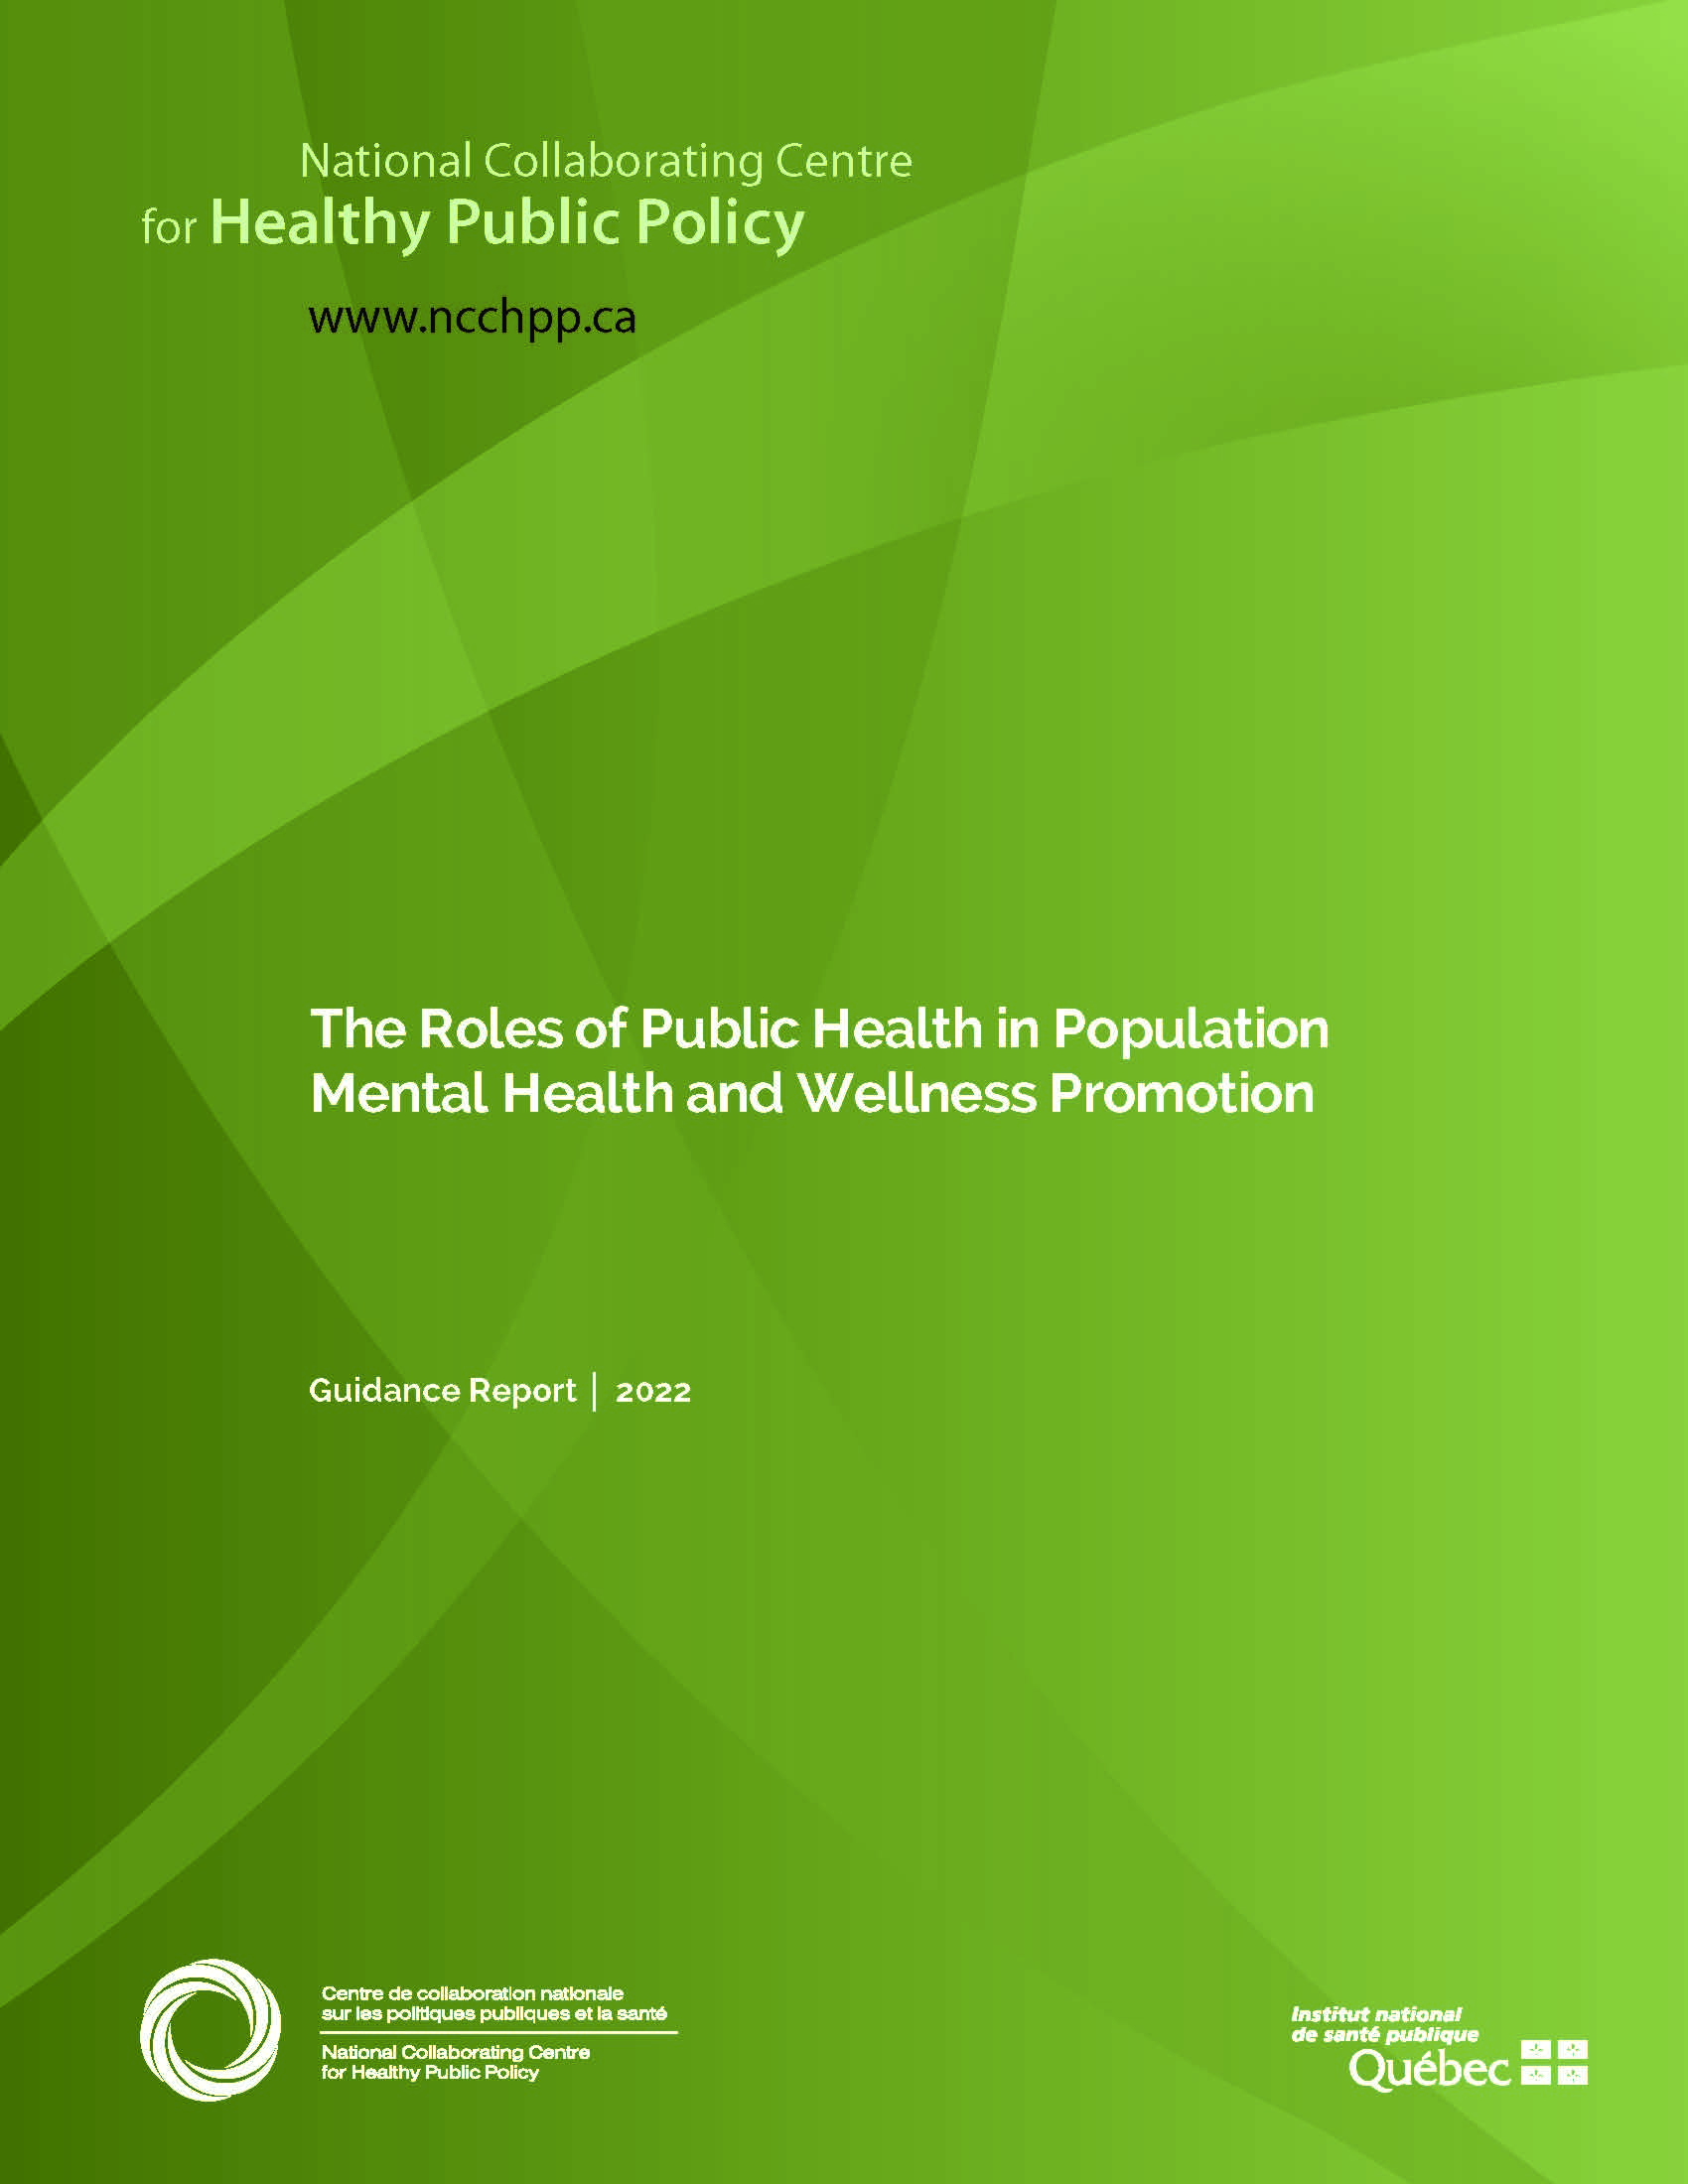 The Roles of Public Health in Population Mental Health and Wellness Promotion